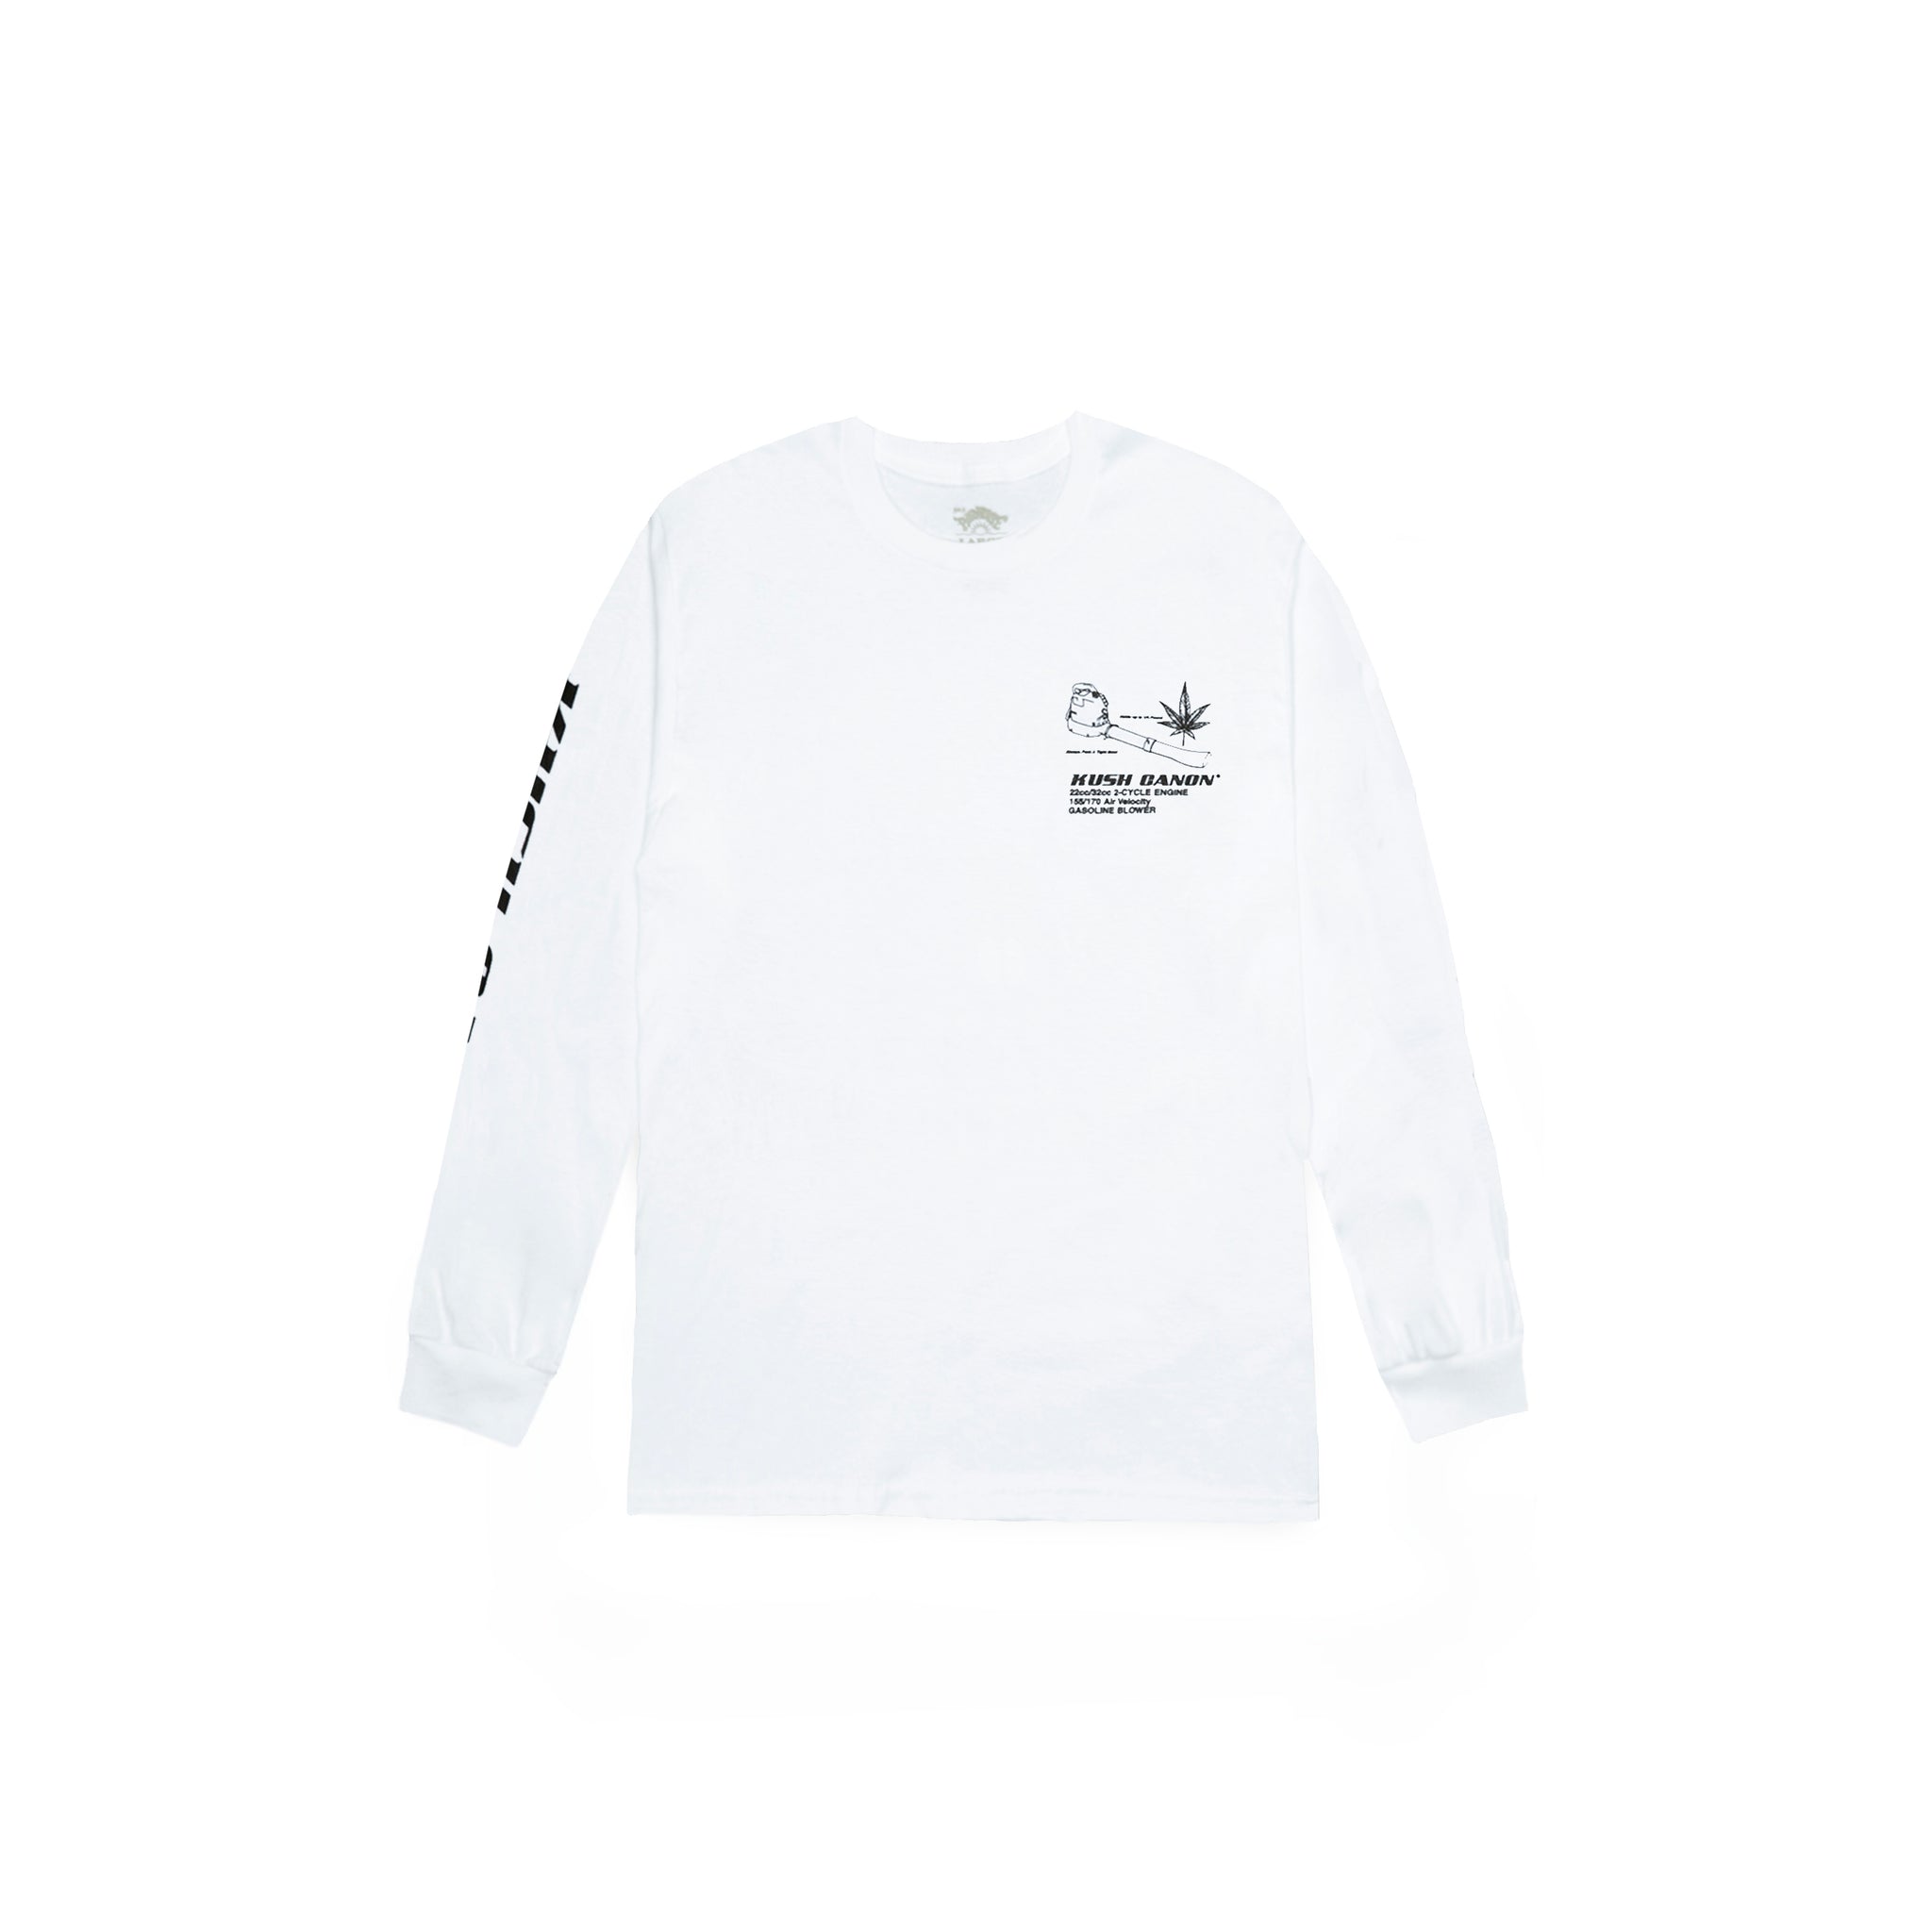 Front view of Made in Paradise World Drug Trade Collection "KUSH CANON" white long sleeve t-shirt